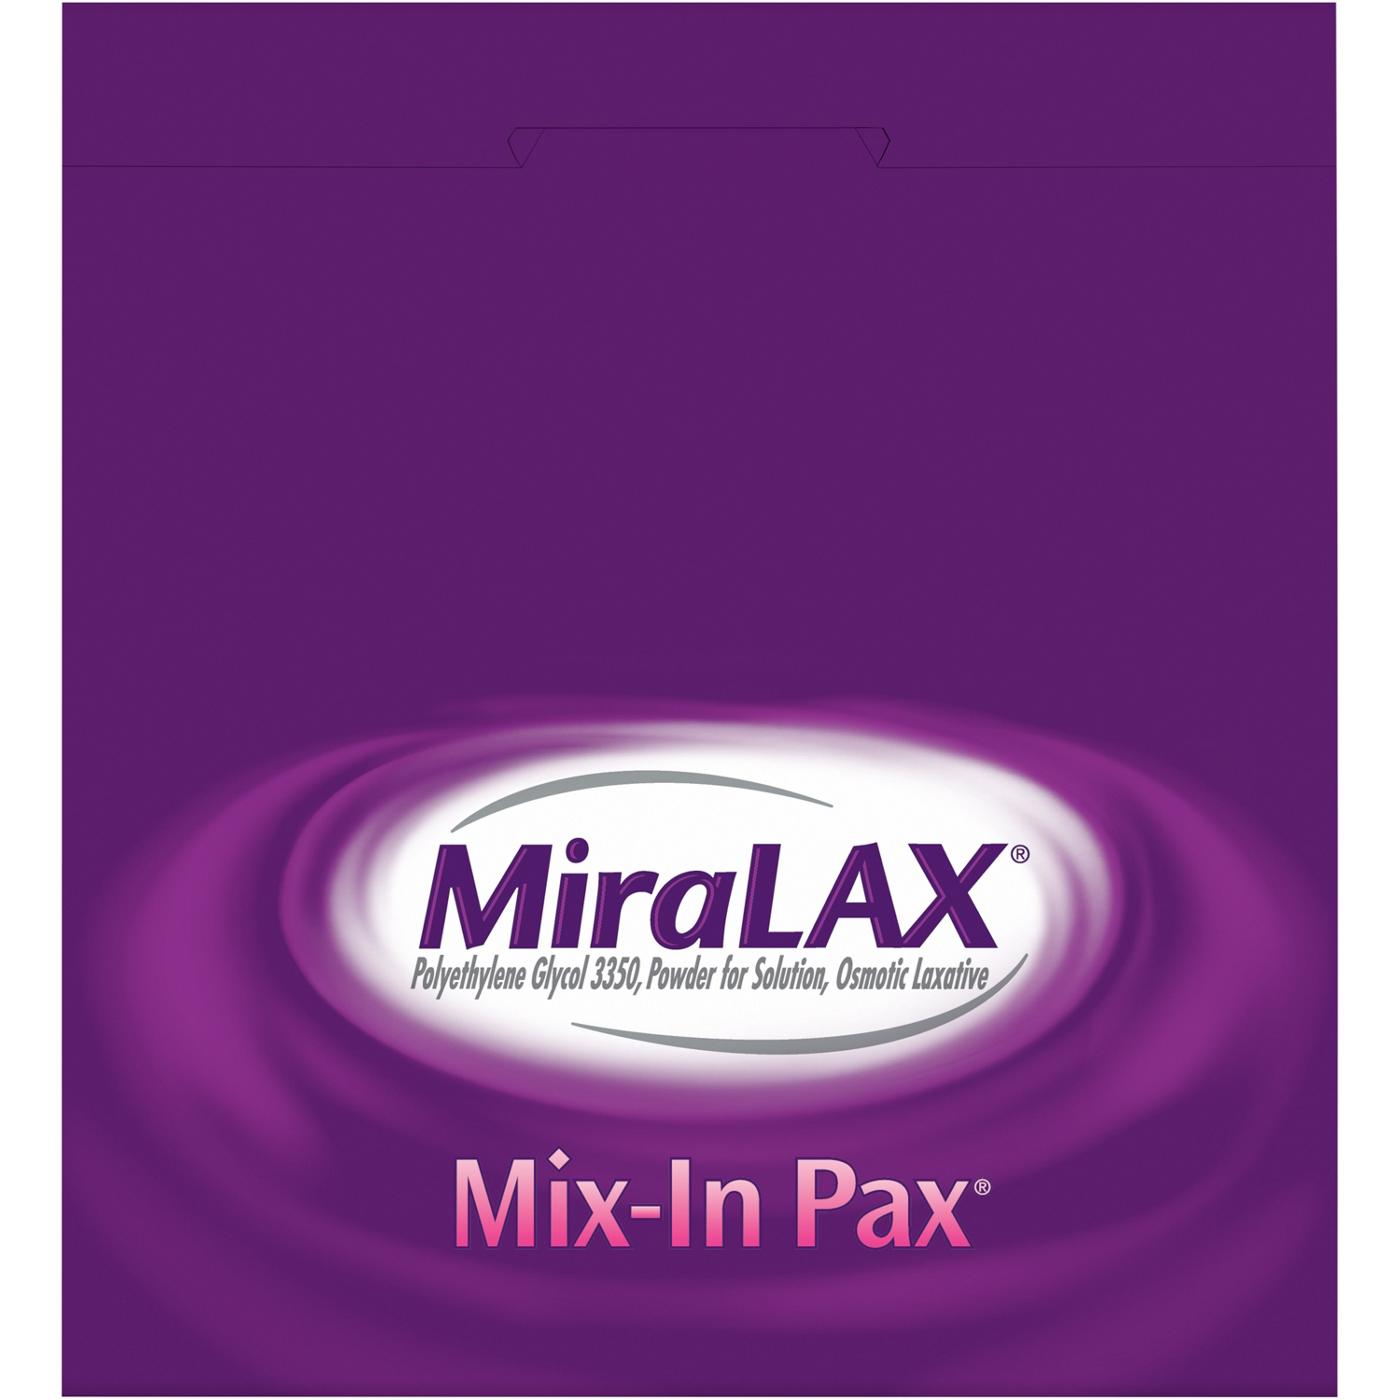 MiraLAX Mix-in Pax Unflavored Powder Packets; image 3 of 5